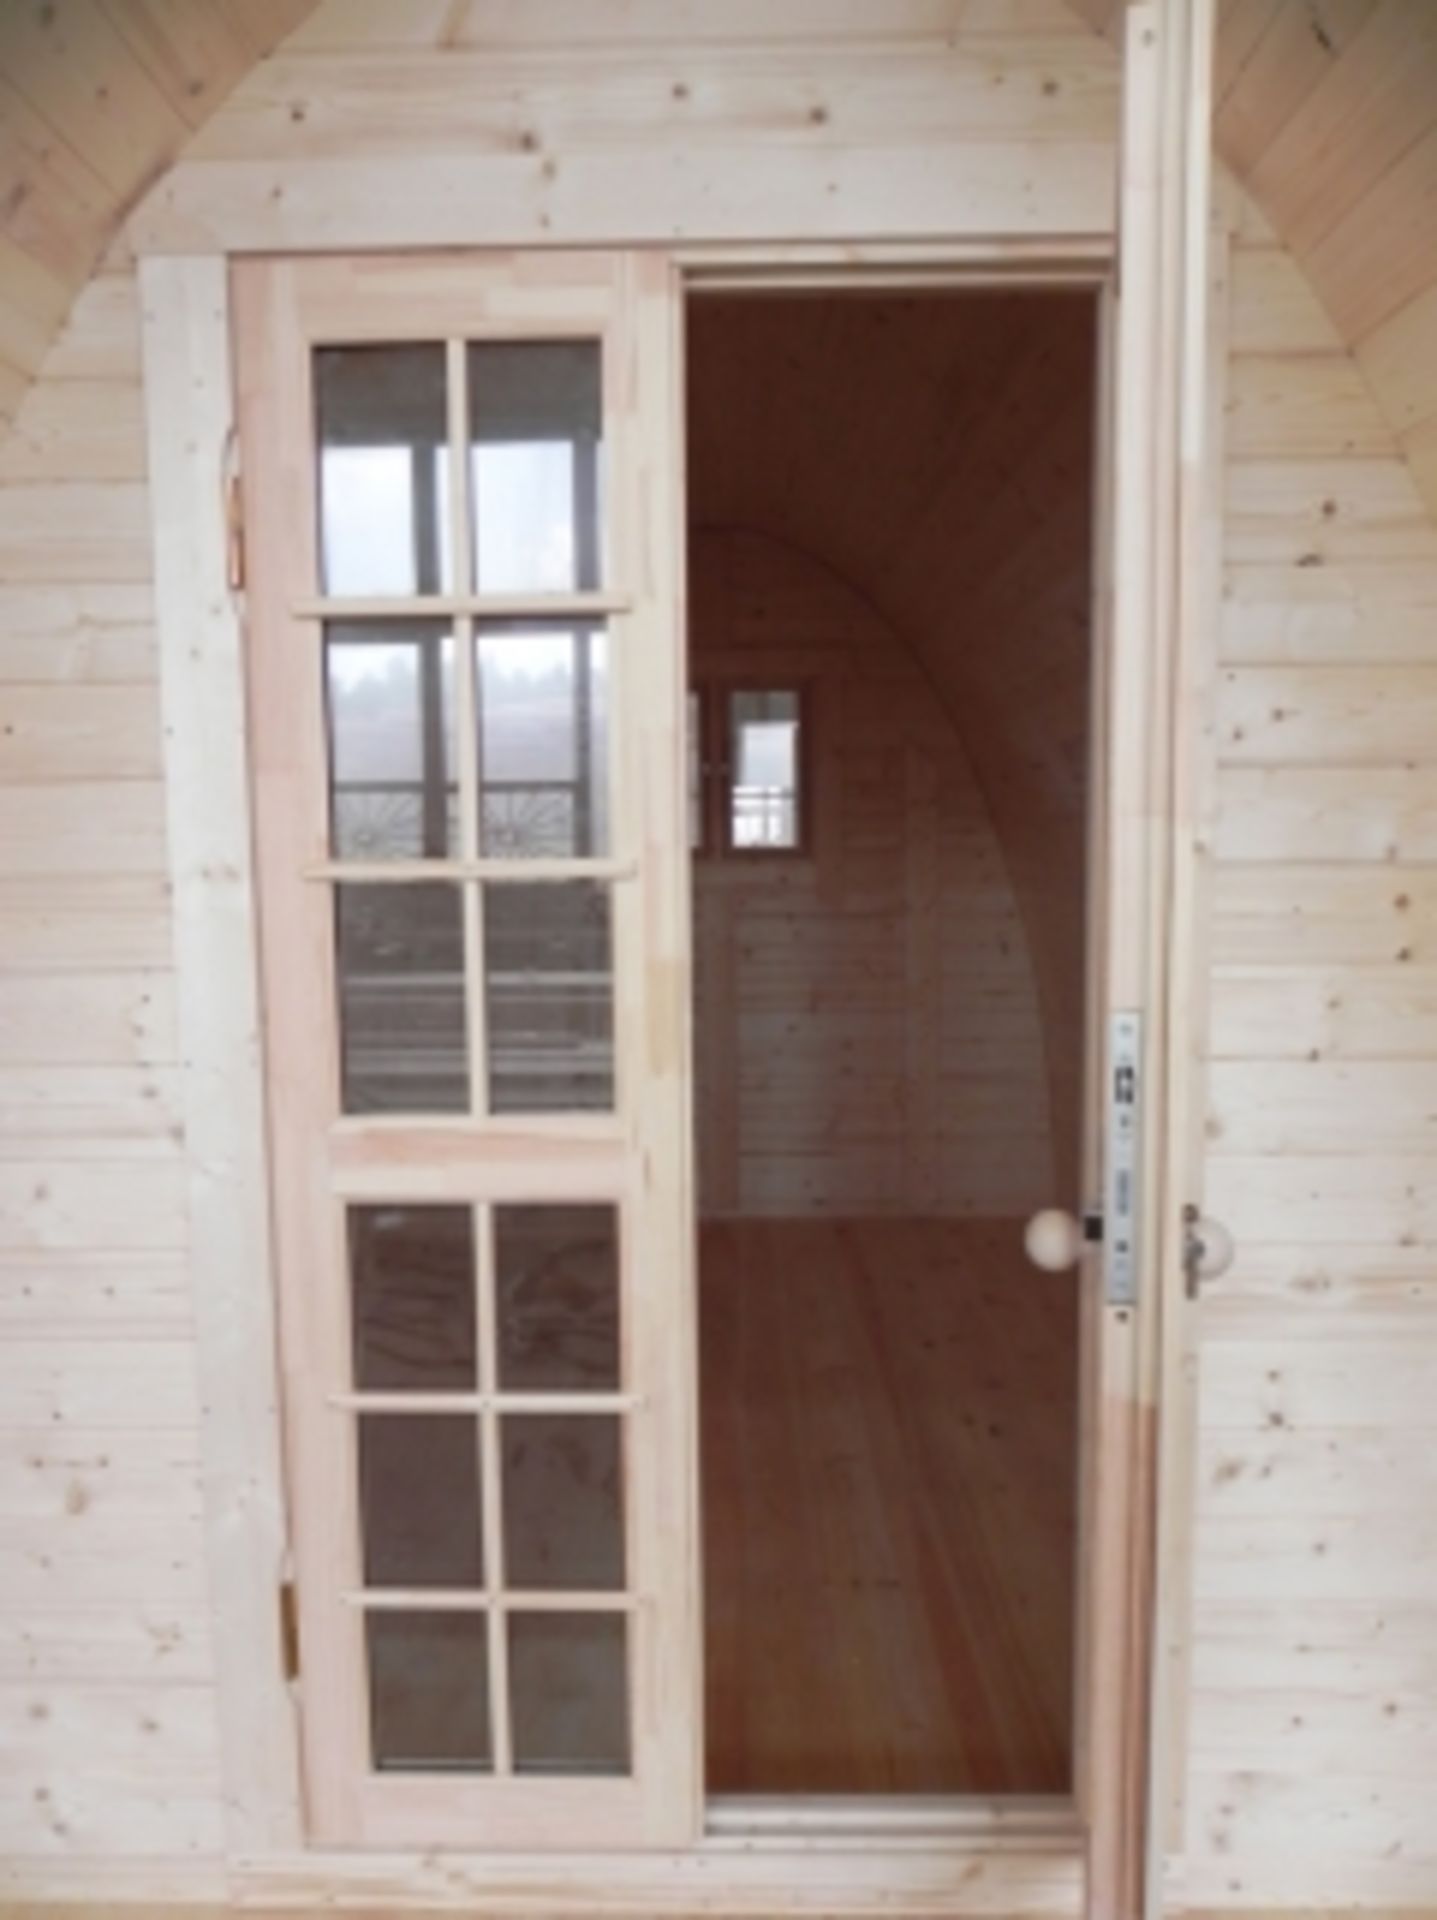 V Brand New 4 x 2.4m Camping Pod Made from Spruce - Double doors with Lock and Double Glass - Image 4 of 4